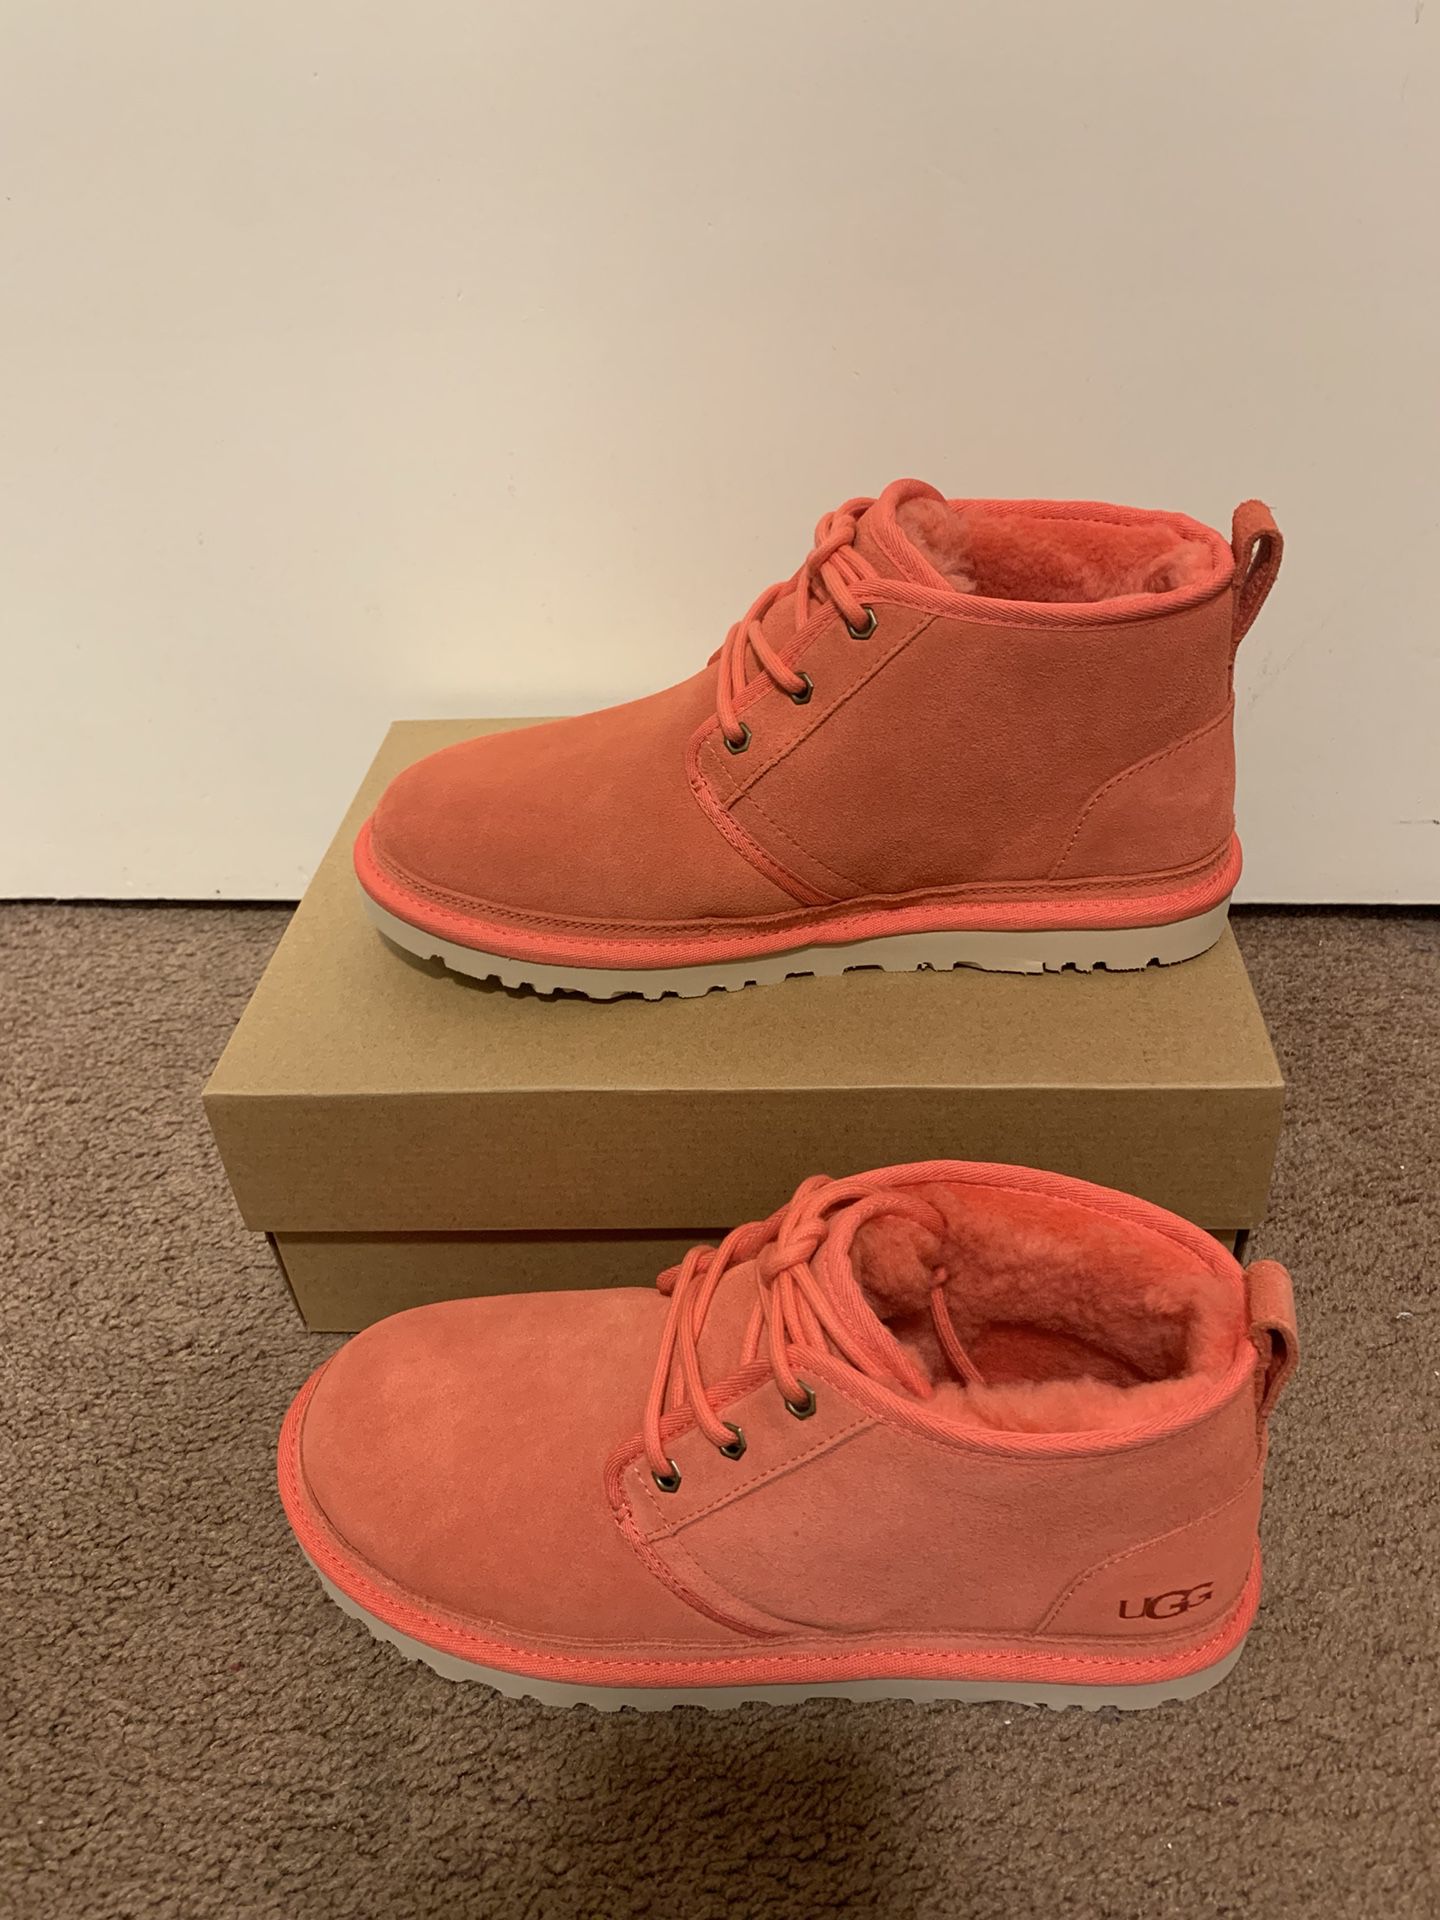 100% Authentic Brand New in Box UGG Neumel Boots / Color: Pop Coral / Women size 6 and 7